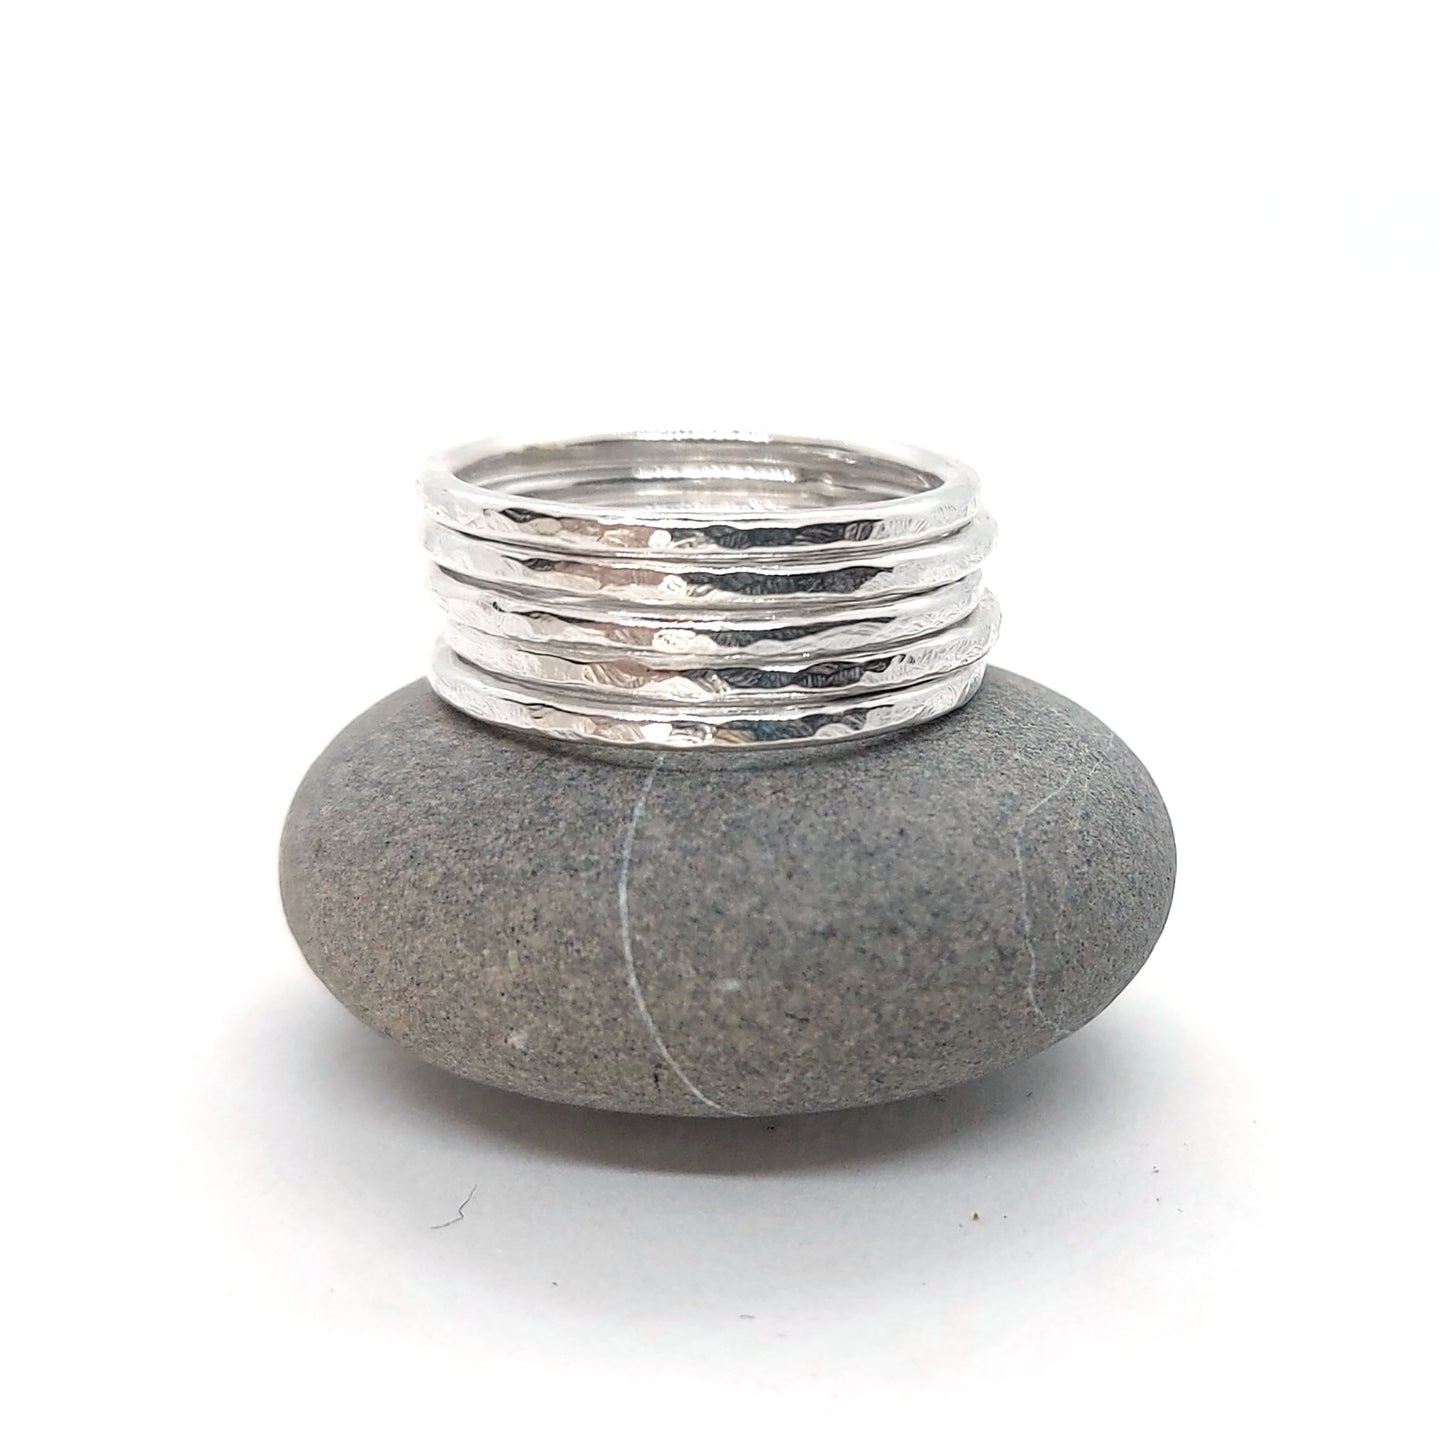 A set of 5 thin silver stacking rings with a hammered finish. Shown pictured on a pebble.